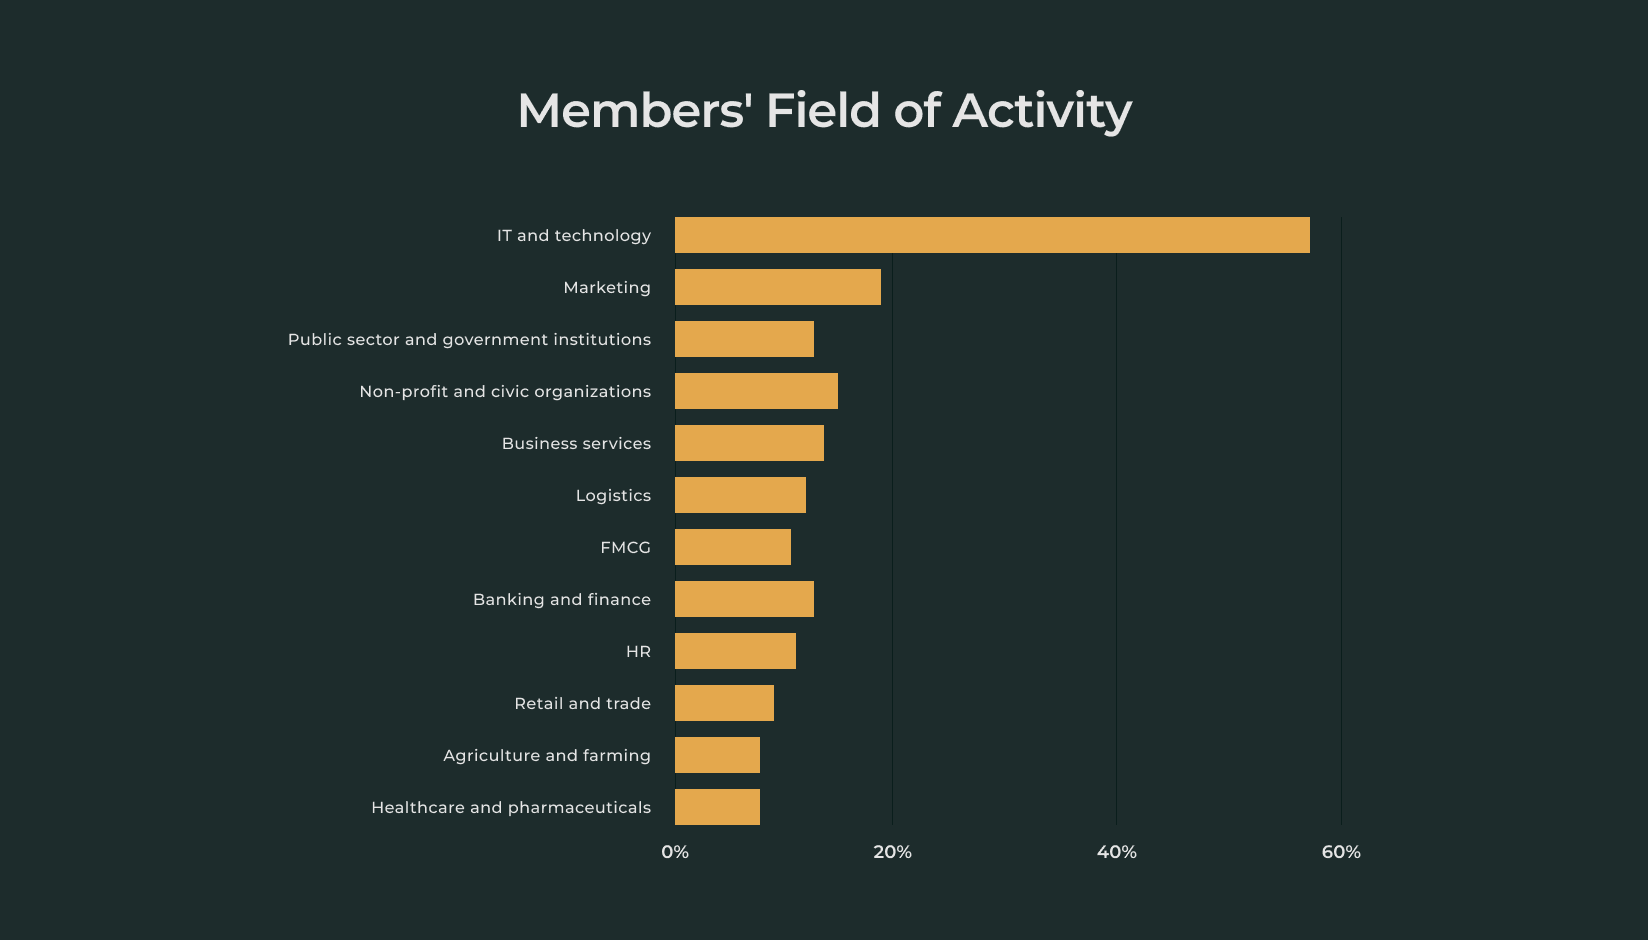 Coworking space members field of activity - andcards survey